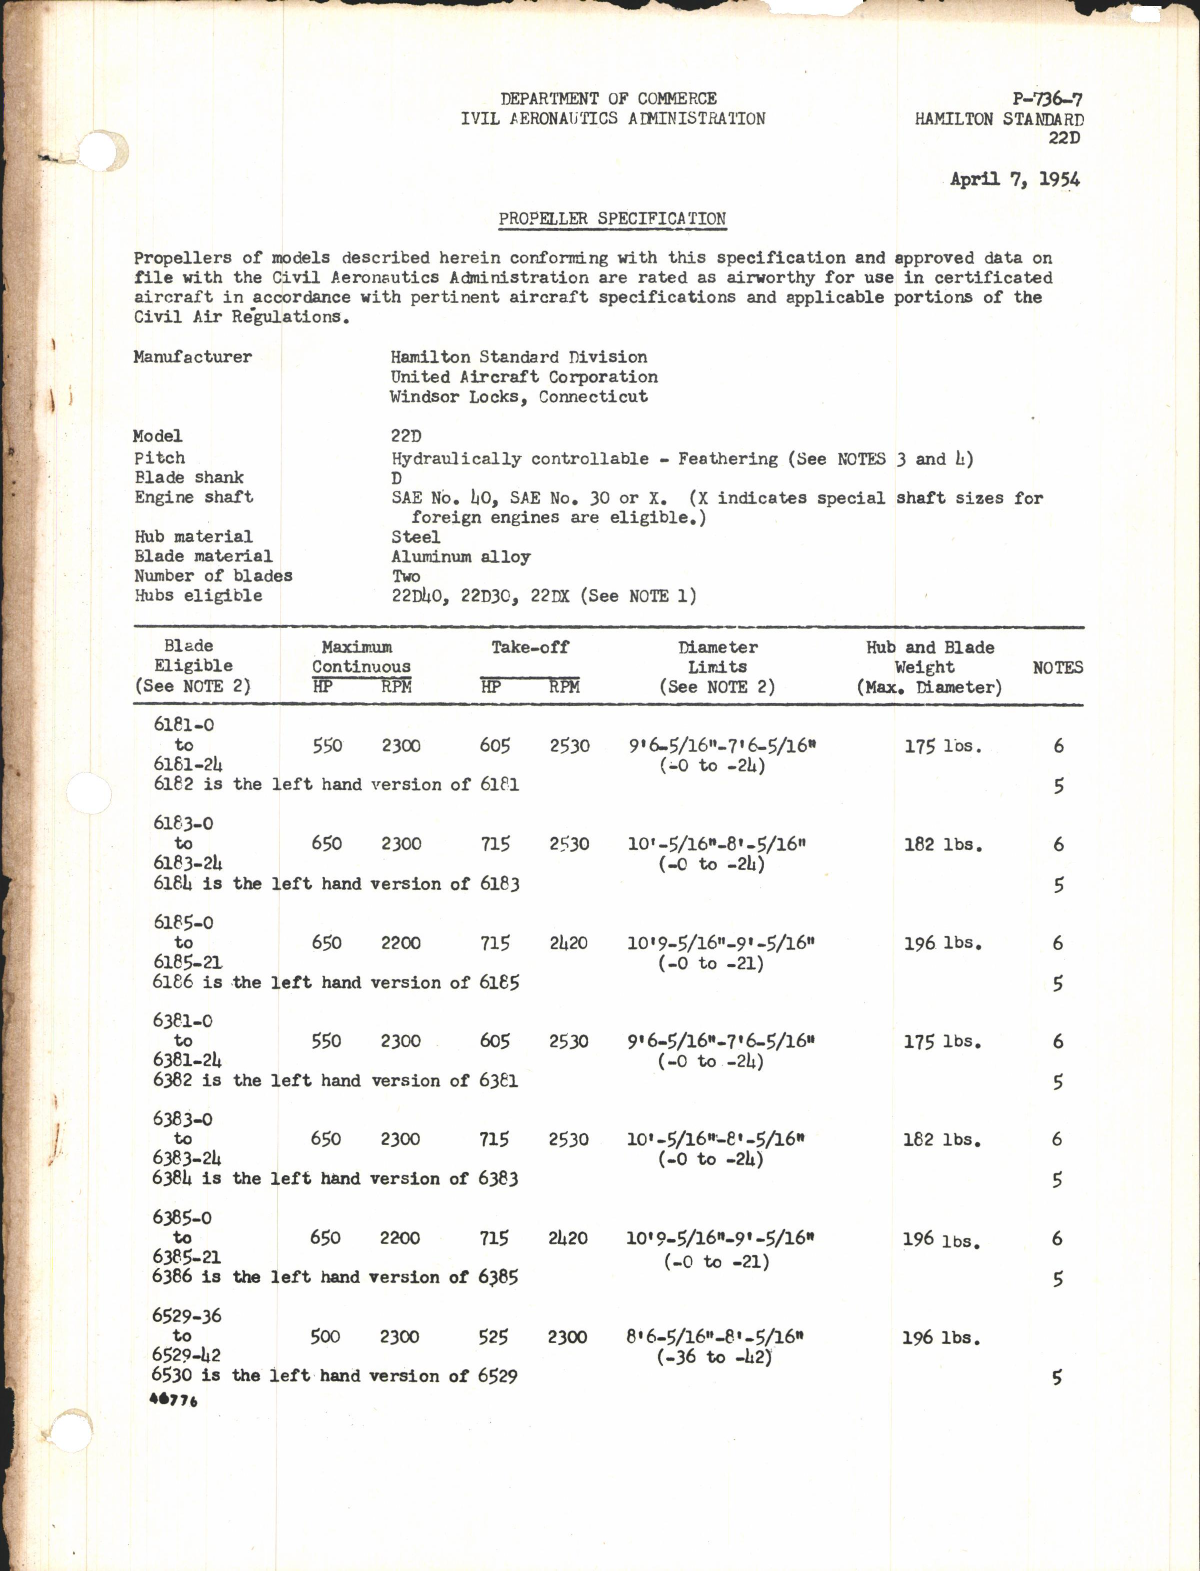 Sample page 1 from AirCorps Library document: Propeller Specification for 22D Propellers